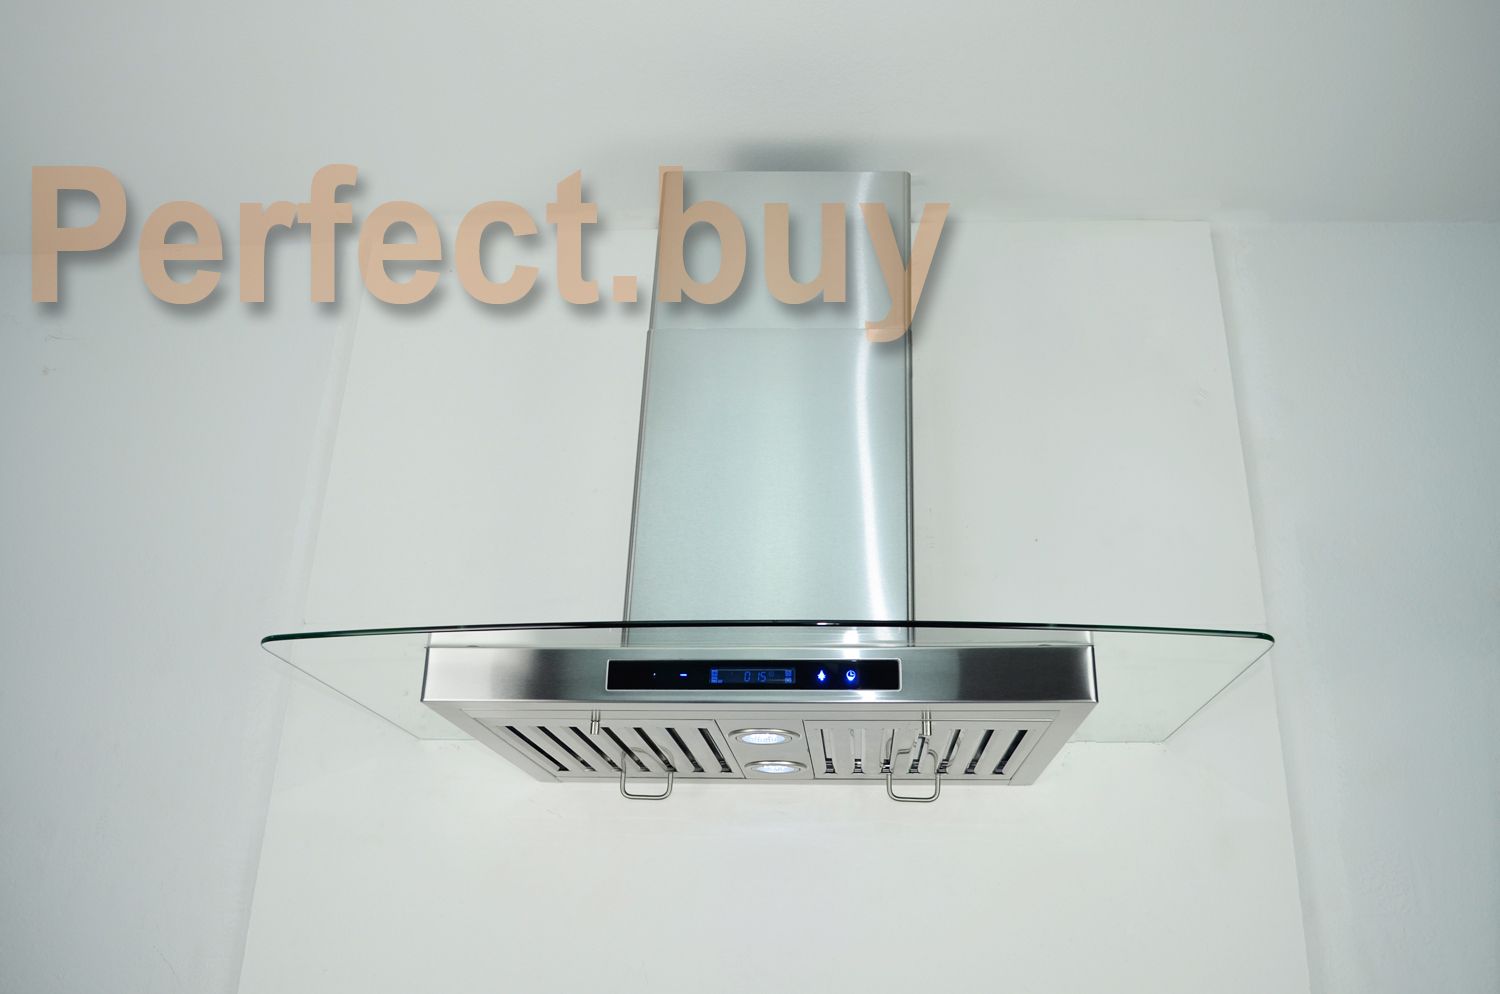   Europe Stainless Steel Wall Mount Range Hood Stove Vent P 198KQ2 36